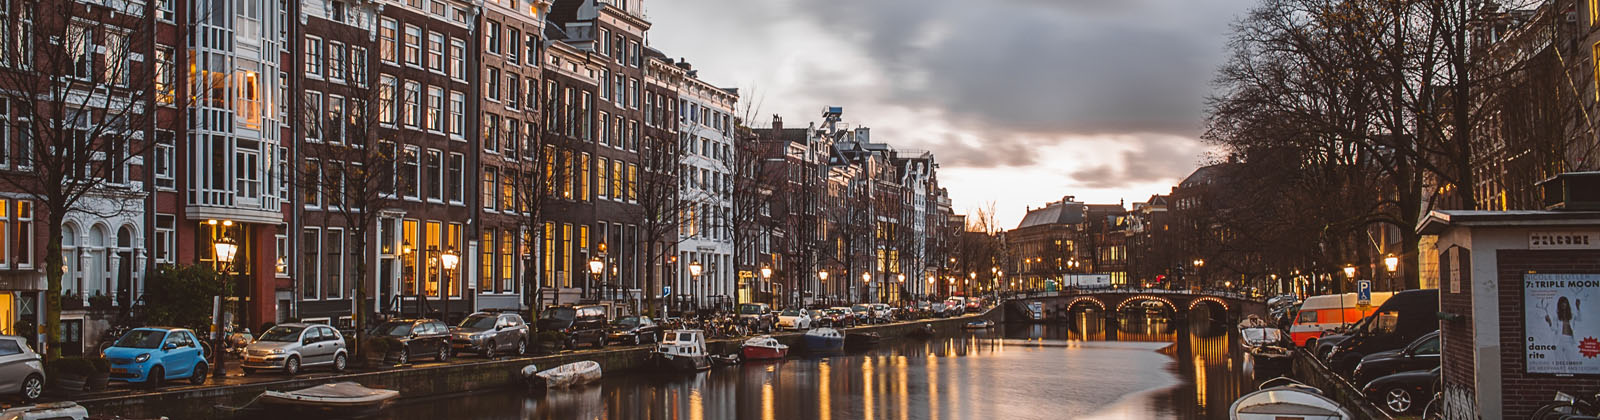 Tour operator - Hotel services - Amsterdam